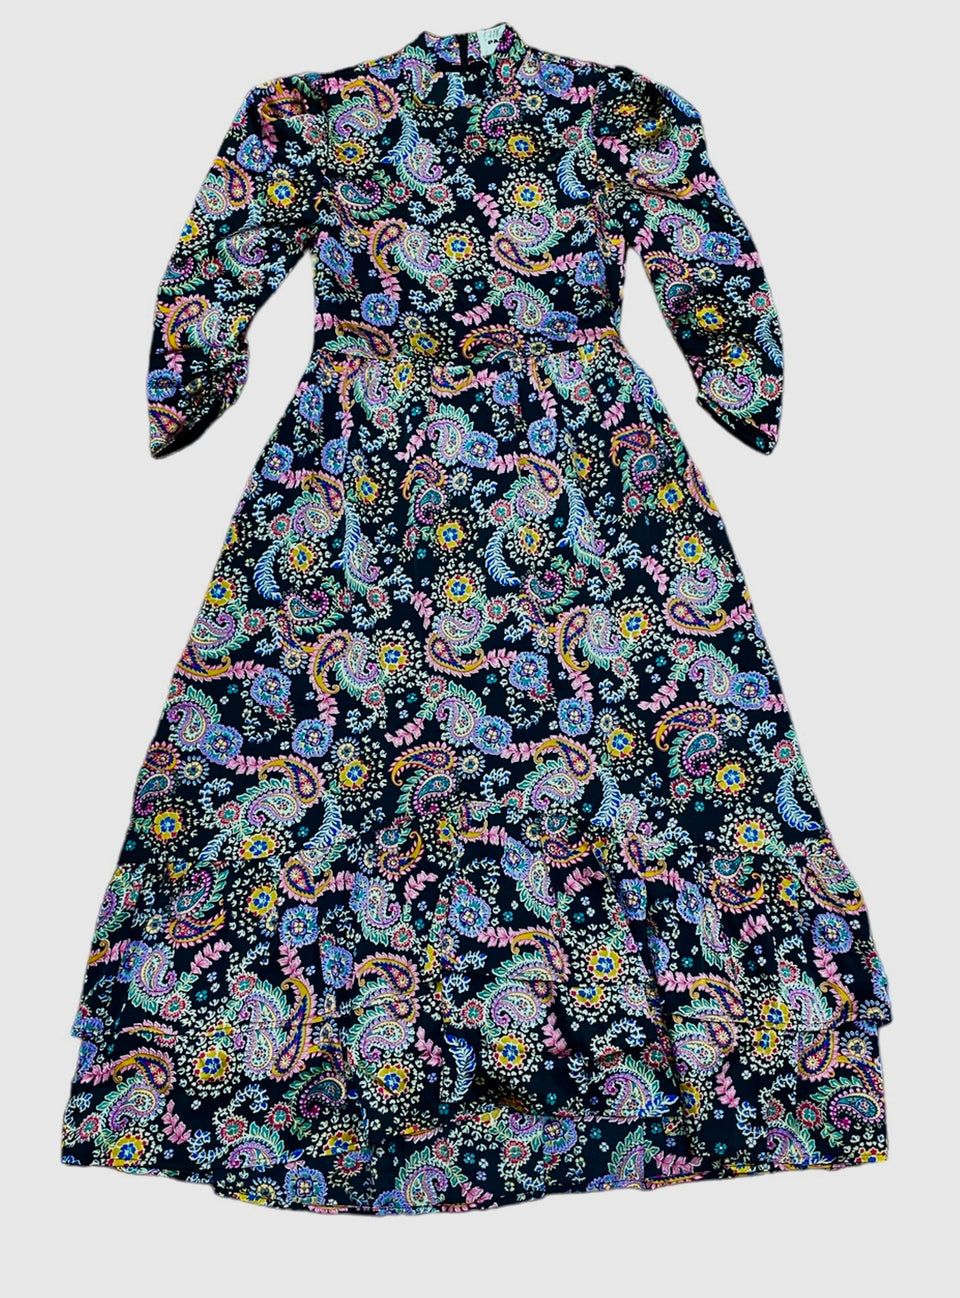 Chicas Paris Multicolored Paisley Silky Puff Sleeve Dress SIZE DOWN